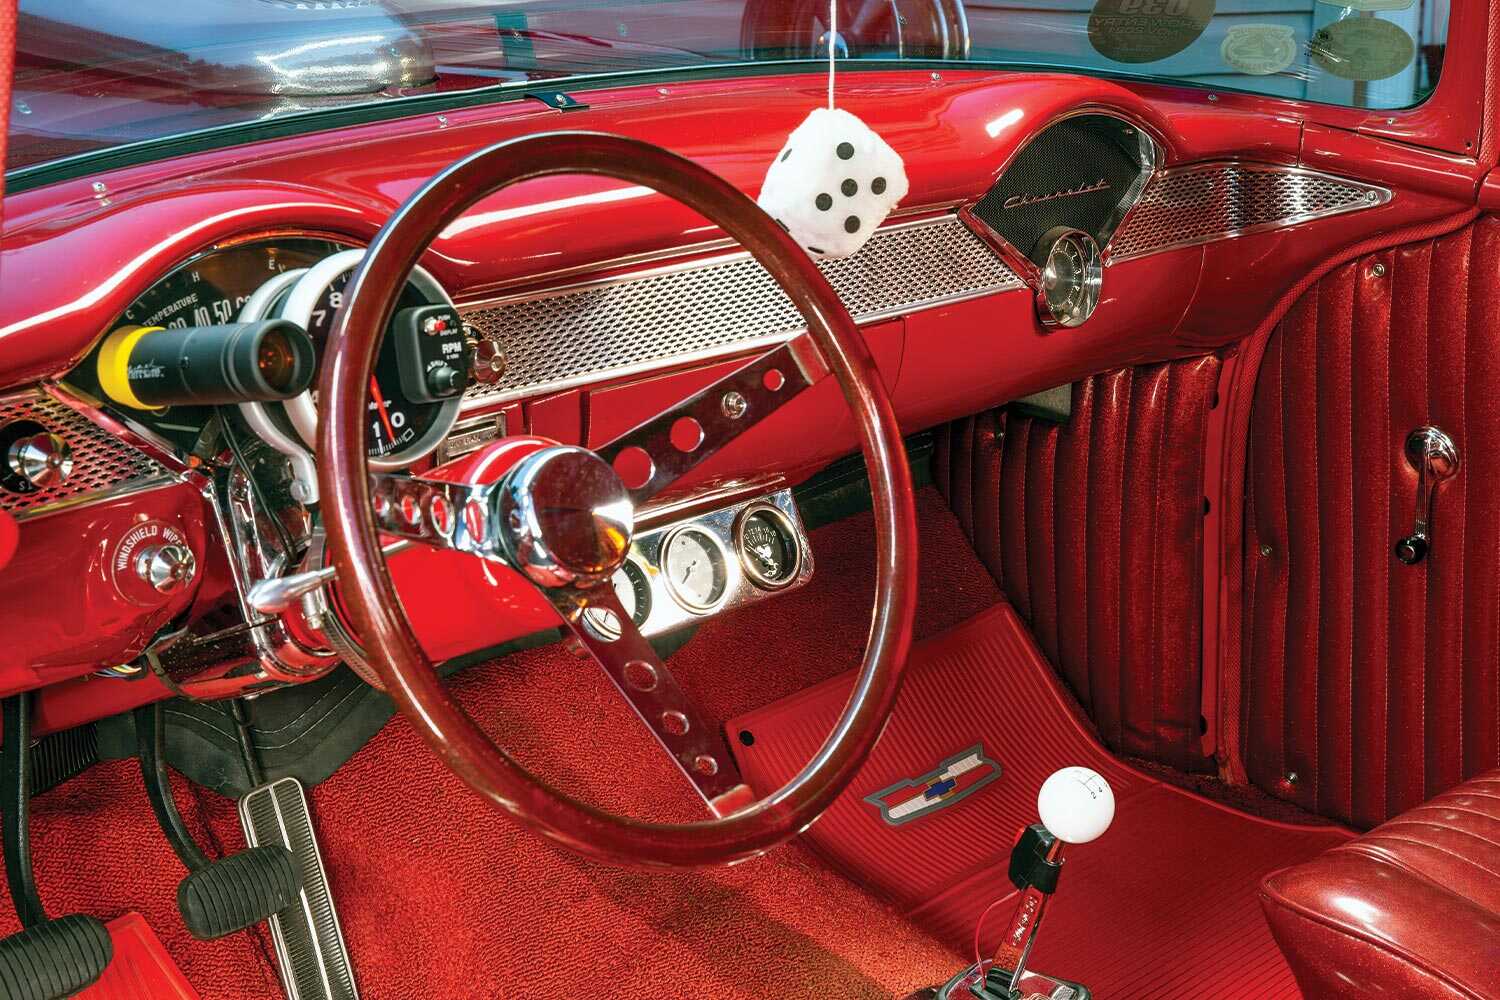 steering wheel and dashboard of the '55 Chevy gasser